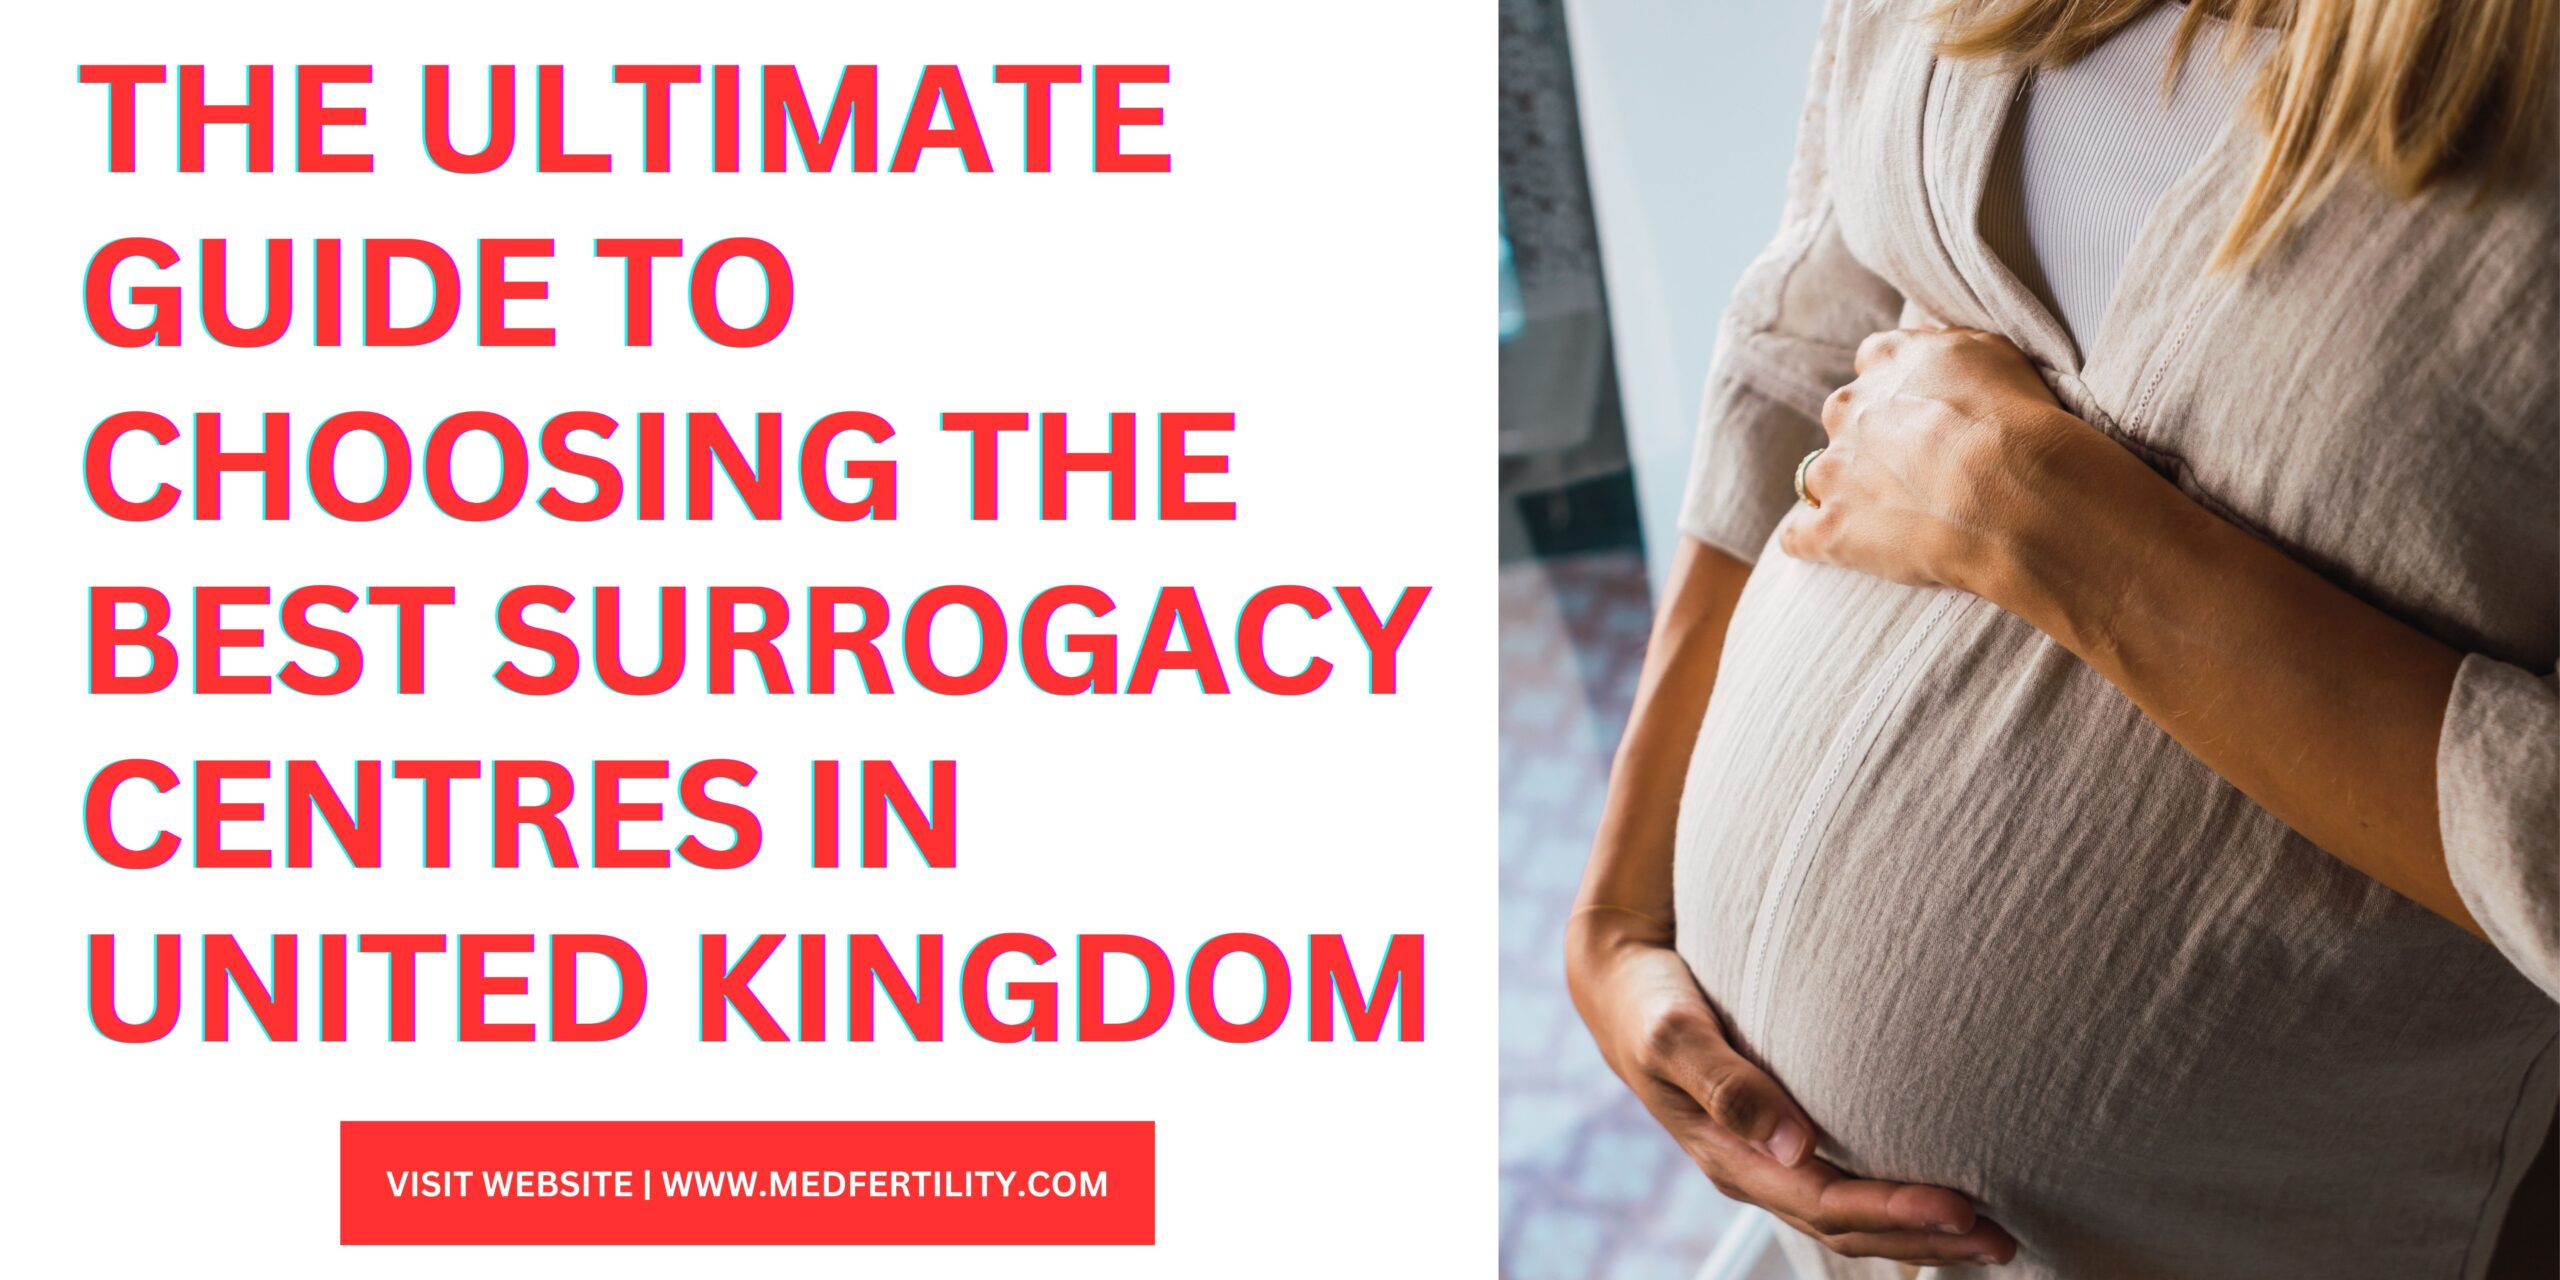 The Ultimate Guide to Choosing the Best Surrogacy Centres in United Kingdom 2023